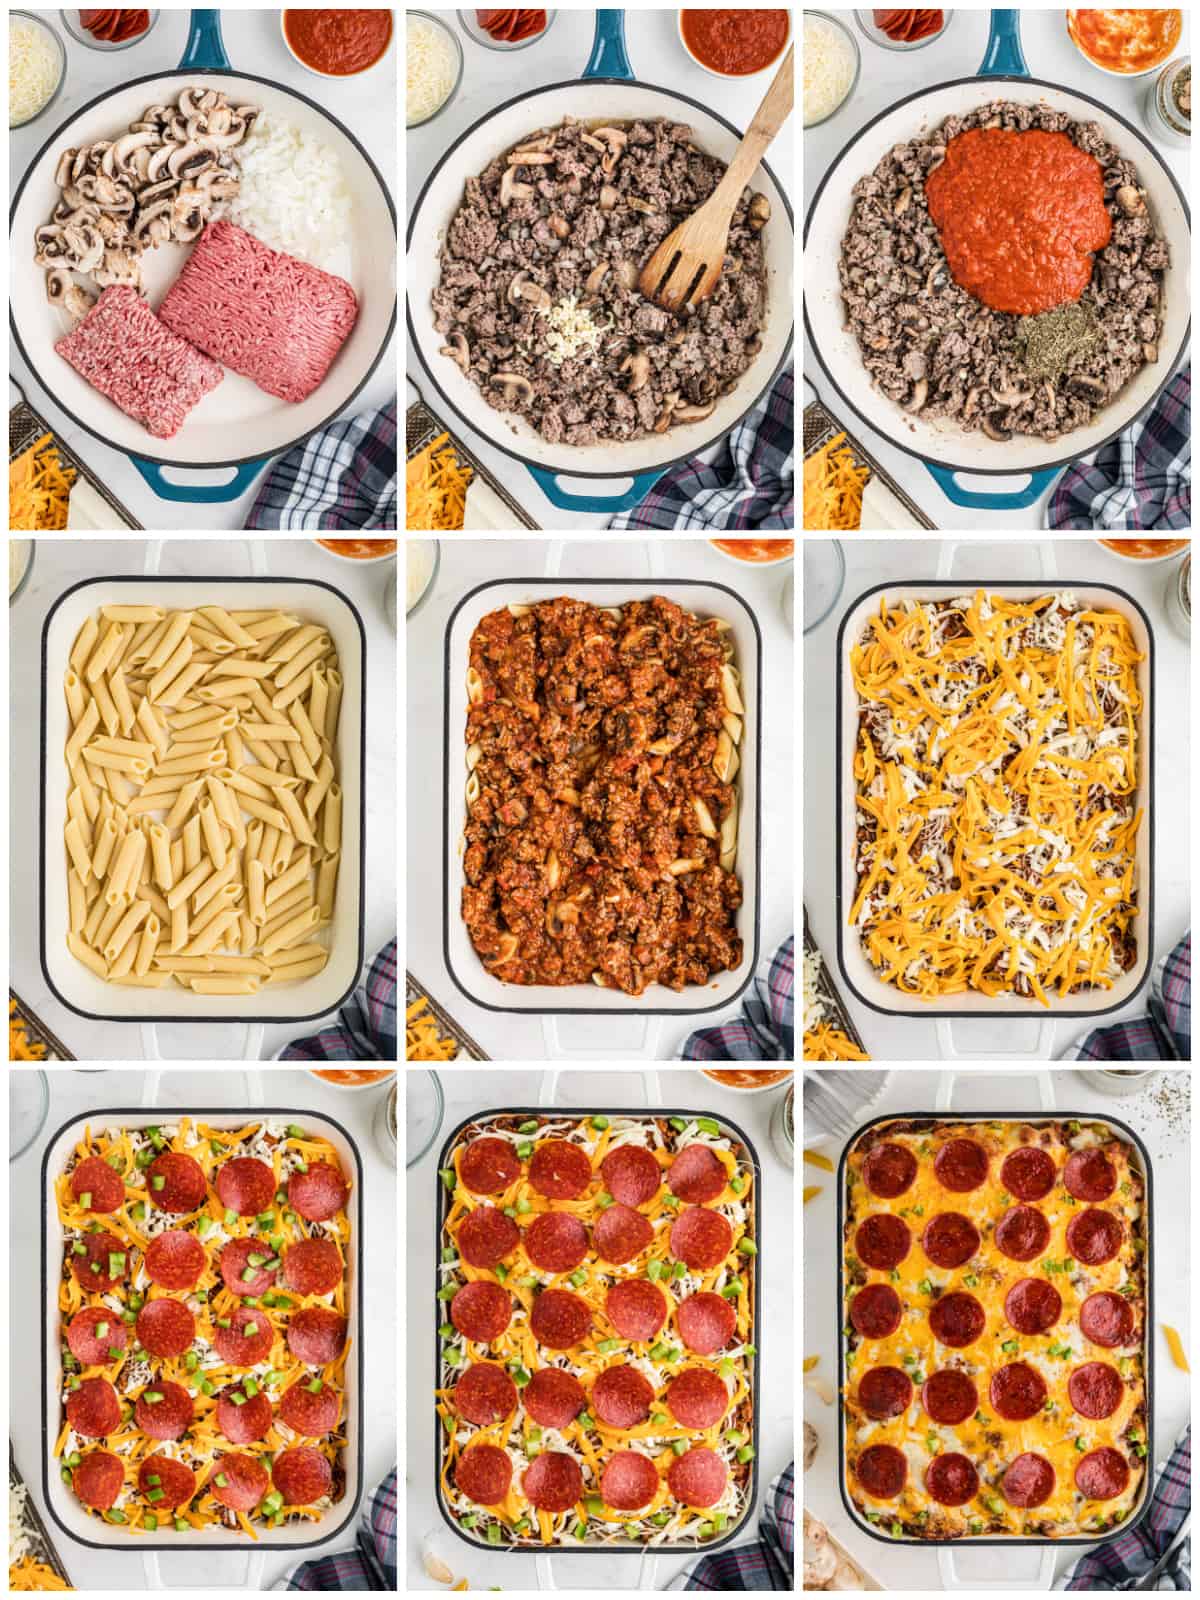 Step by step photos on how to make Pizza Casserole.